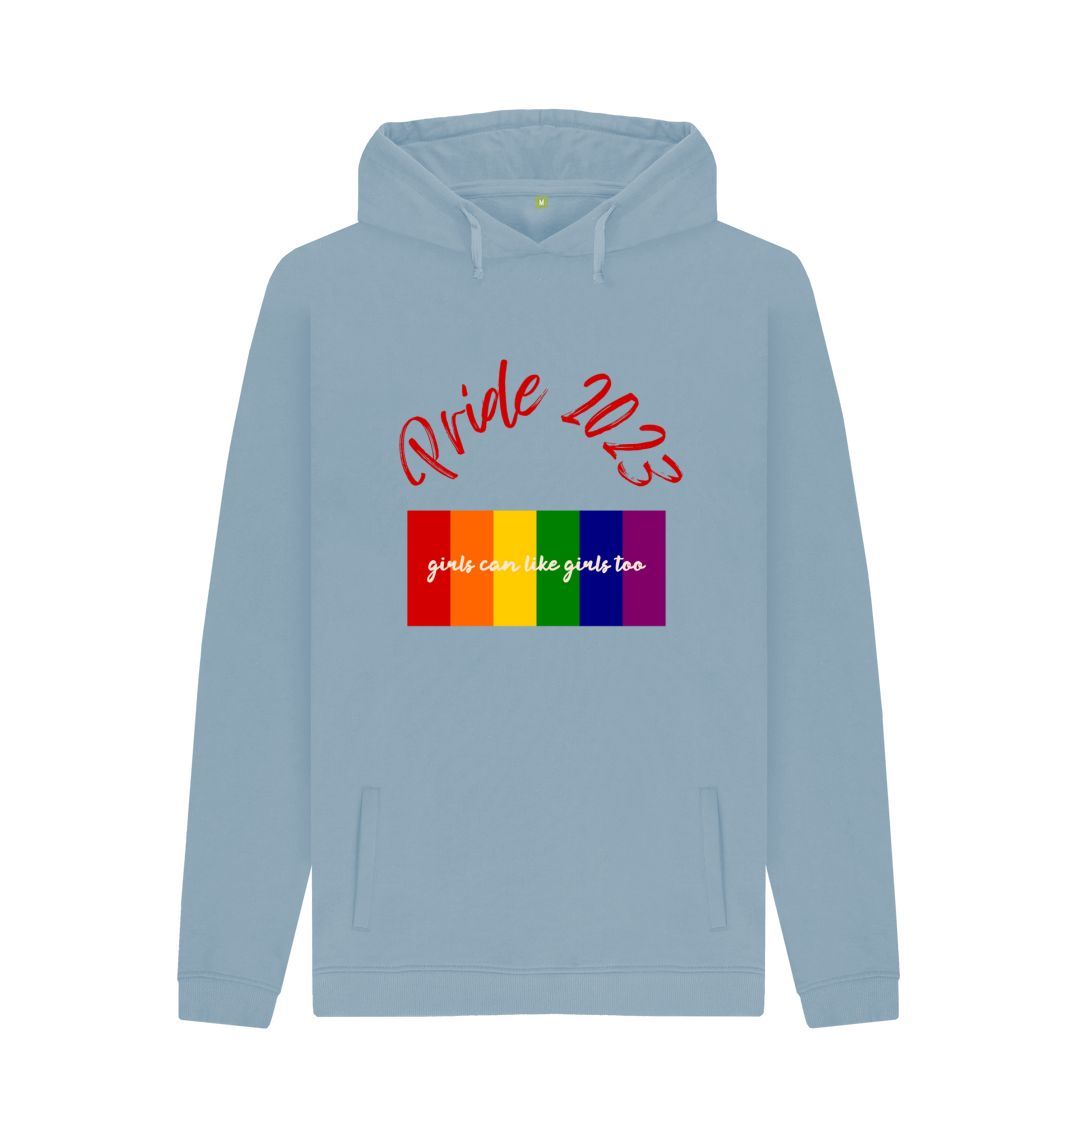 Men's pullover hoodie - Girls can like girls